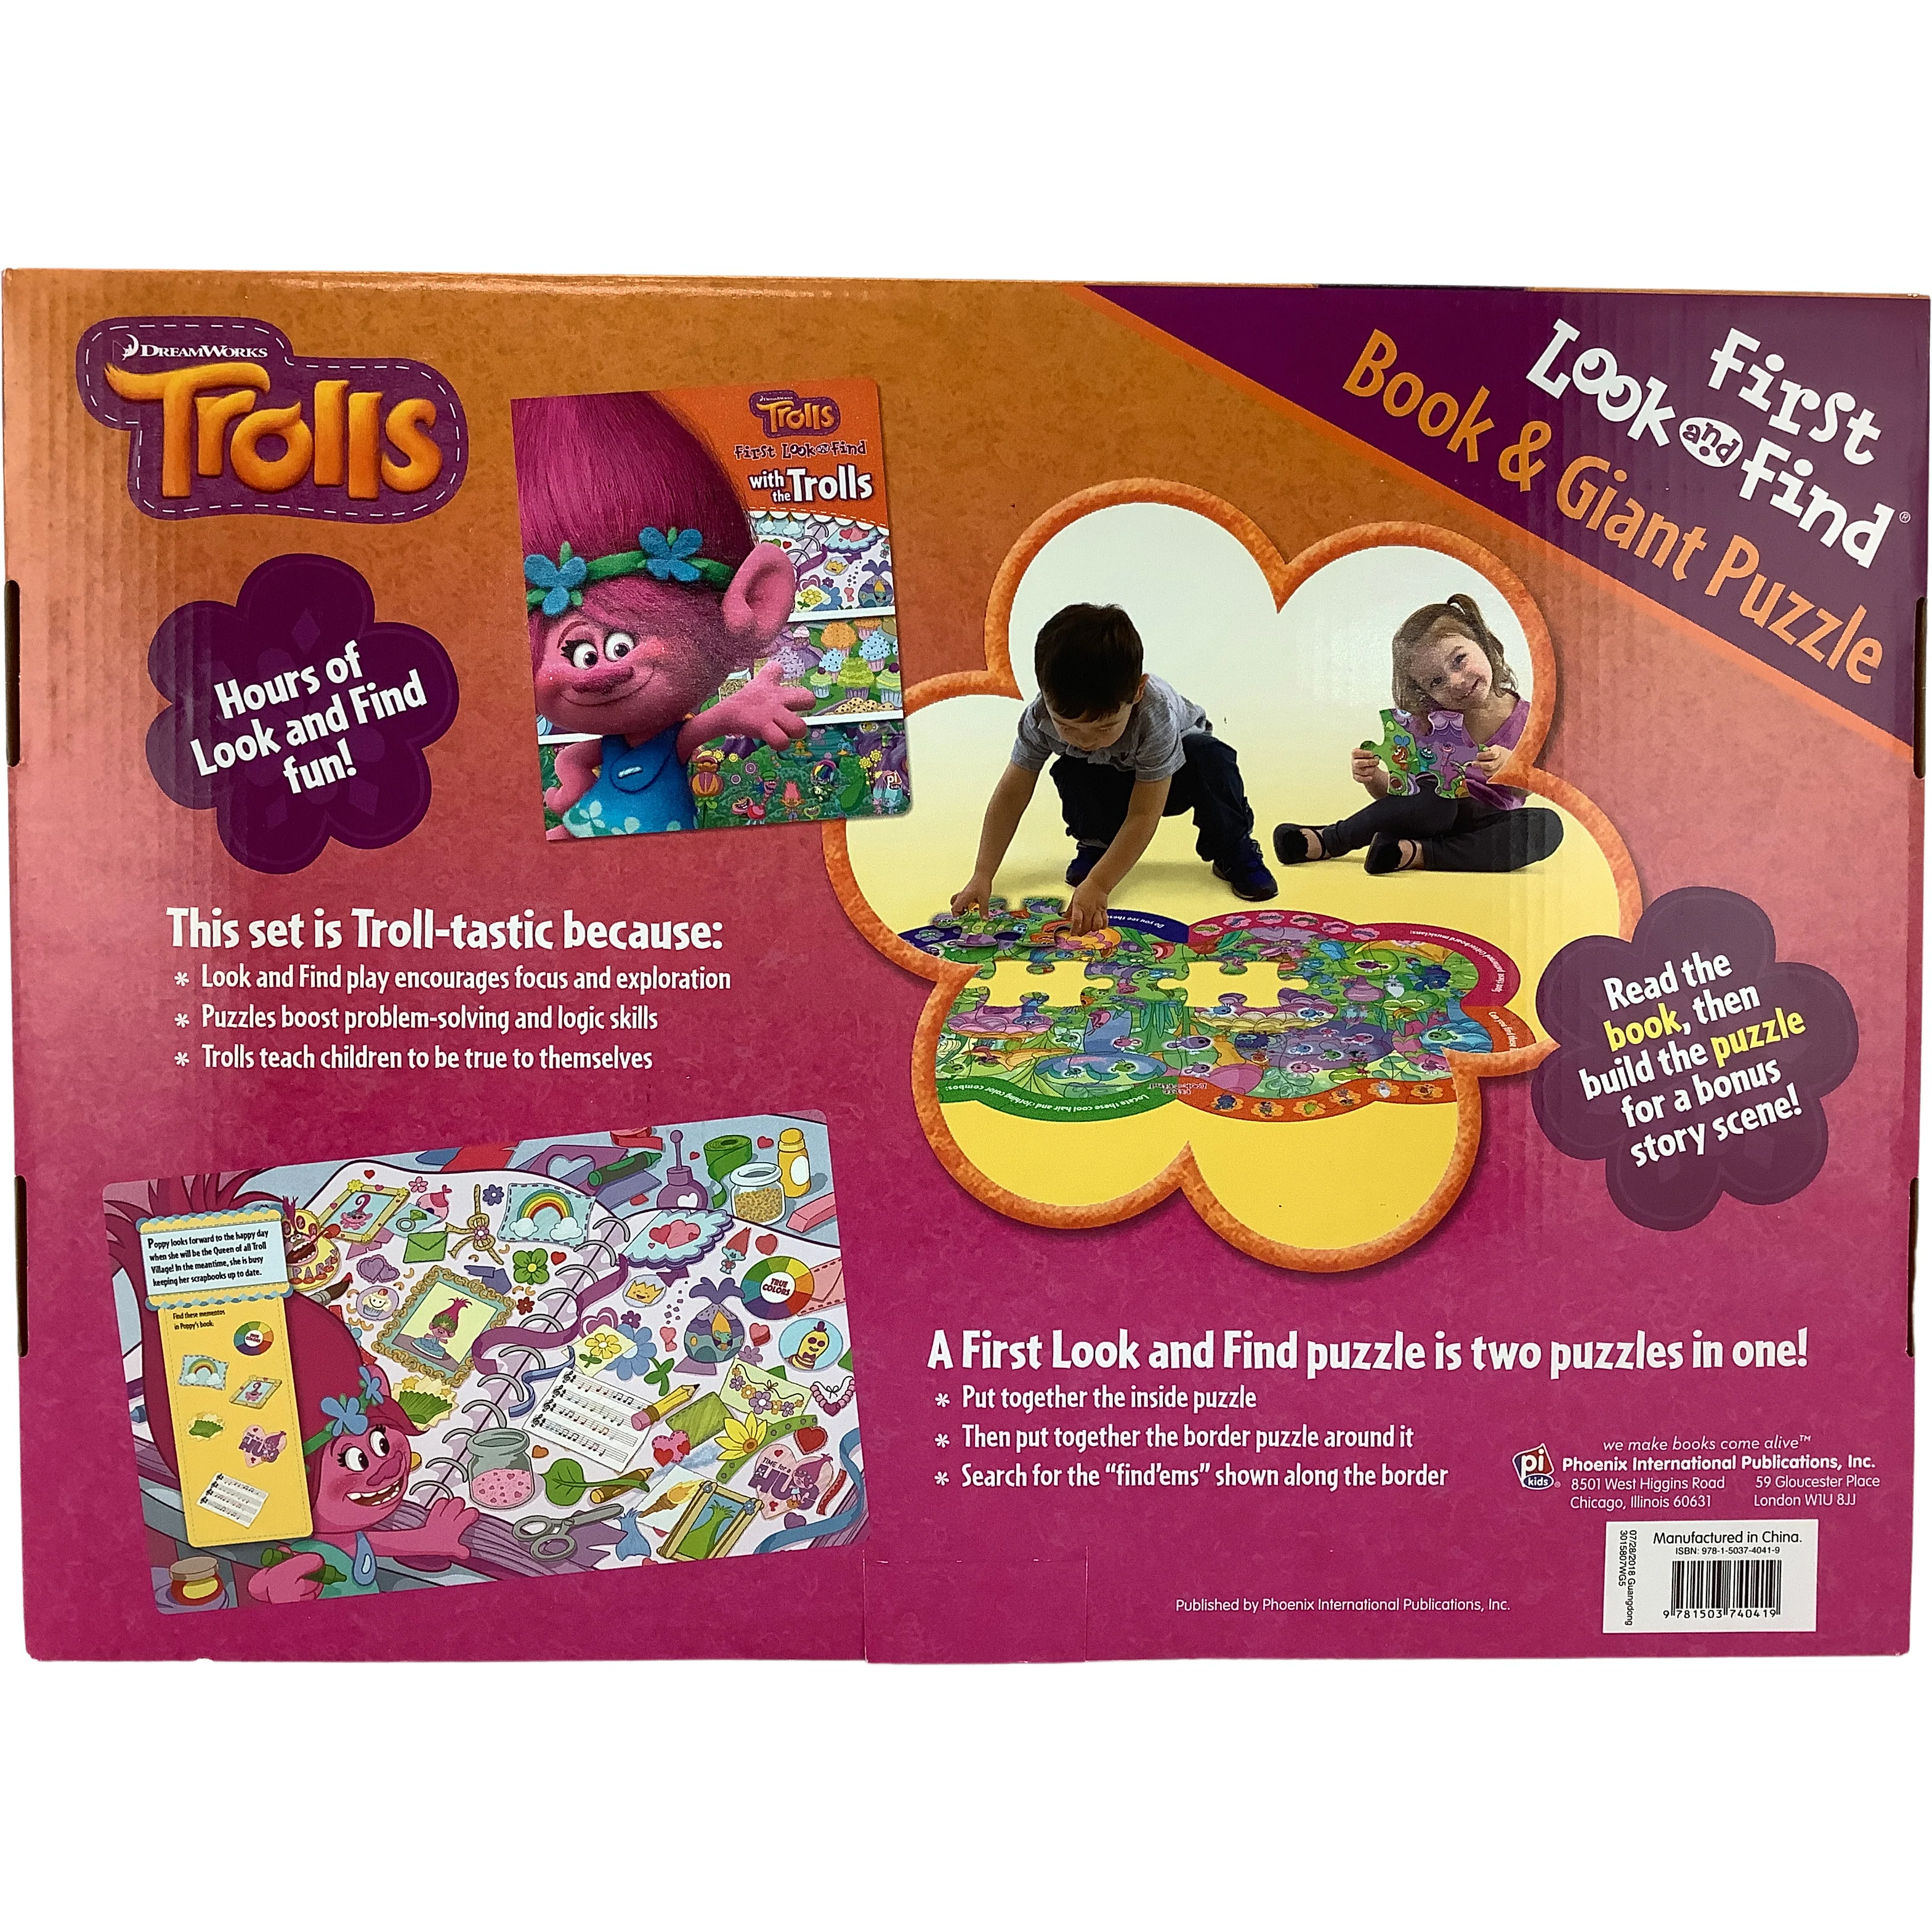 DreamWorks Trolls Book and Puzzle / First Look and Find / Giant Floor Puzzle **DEALS**